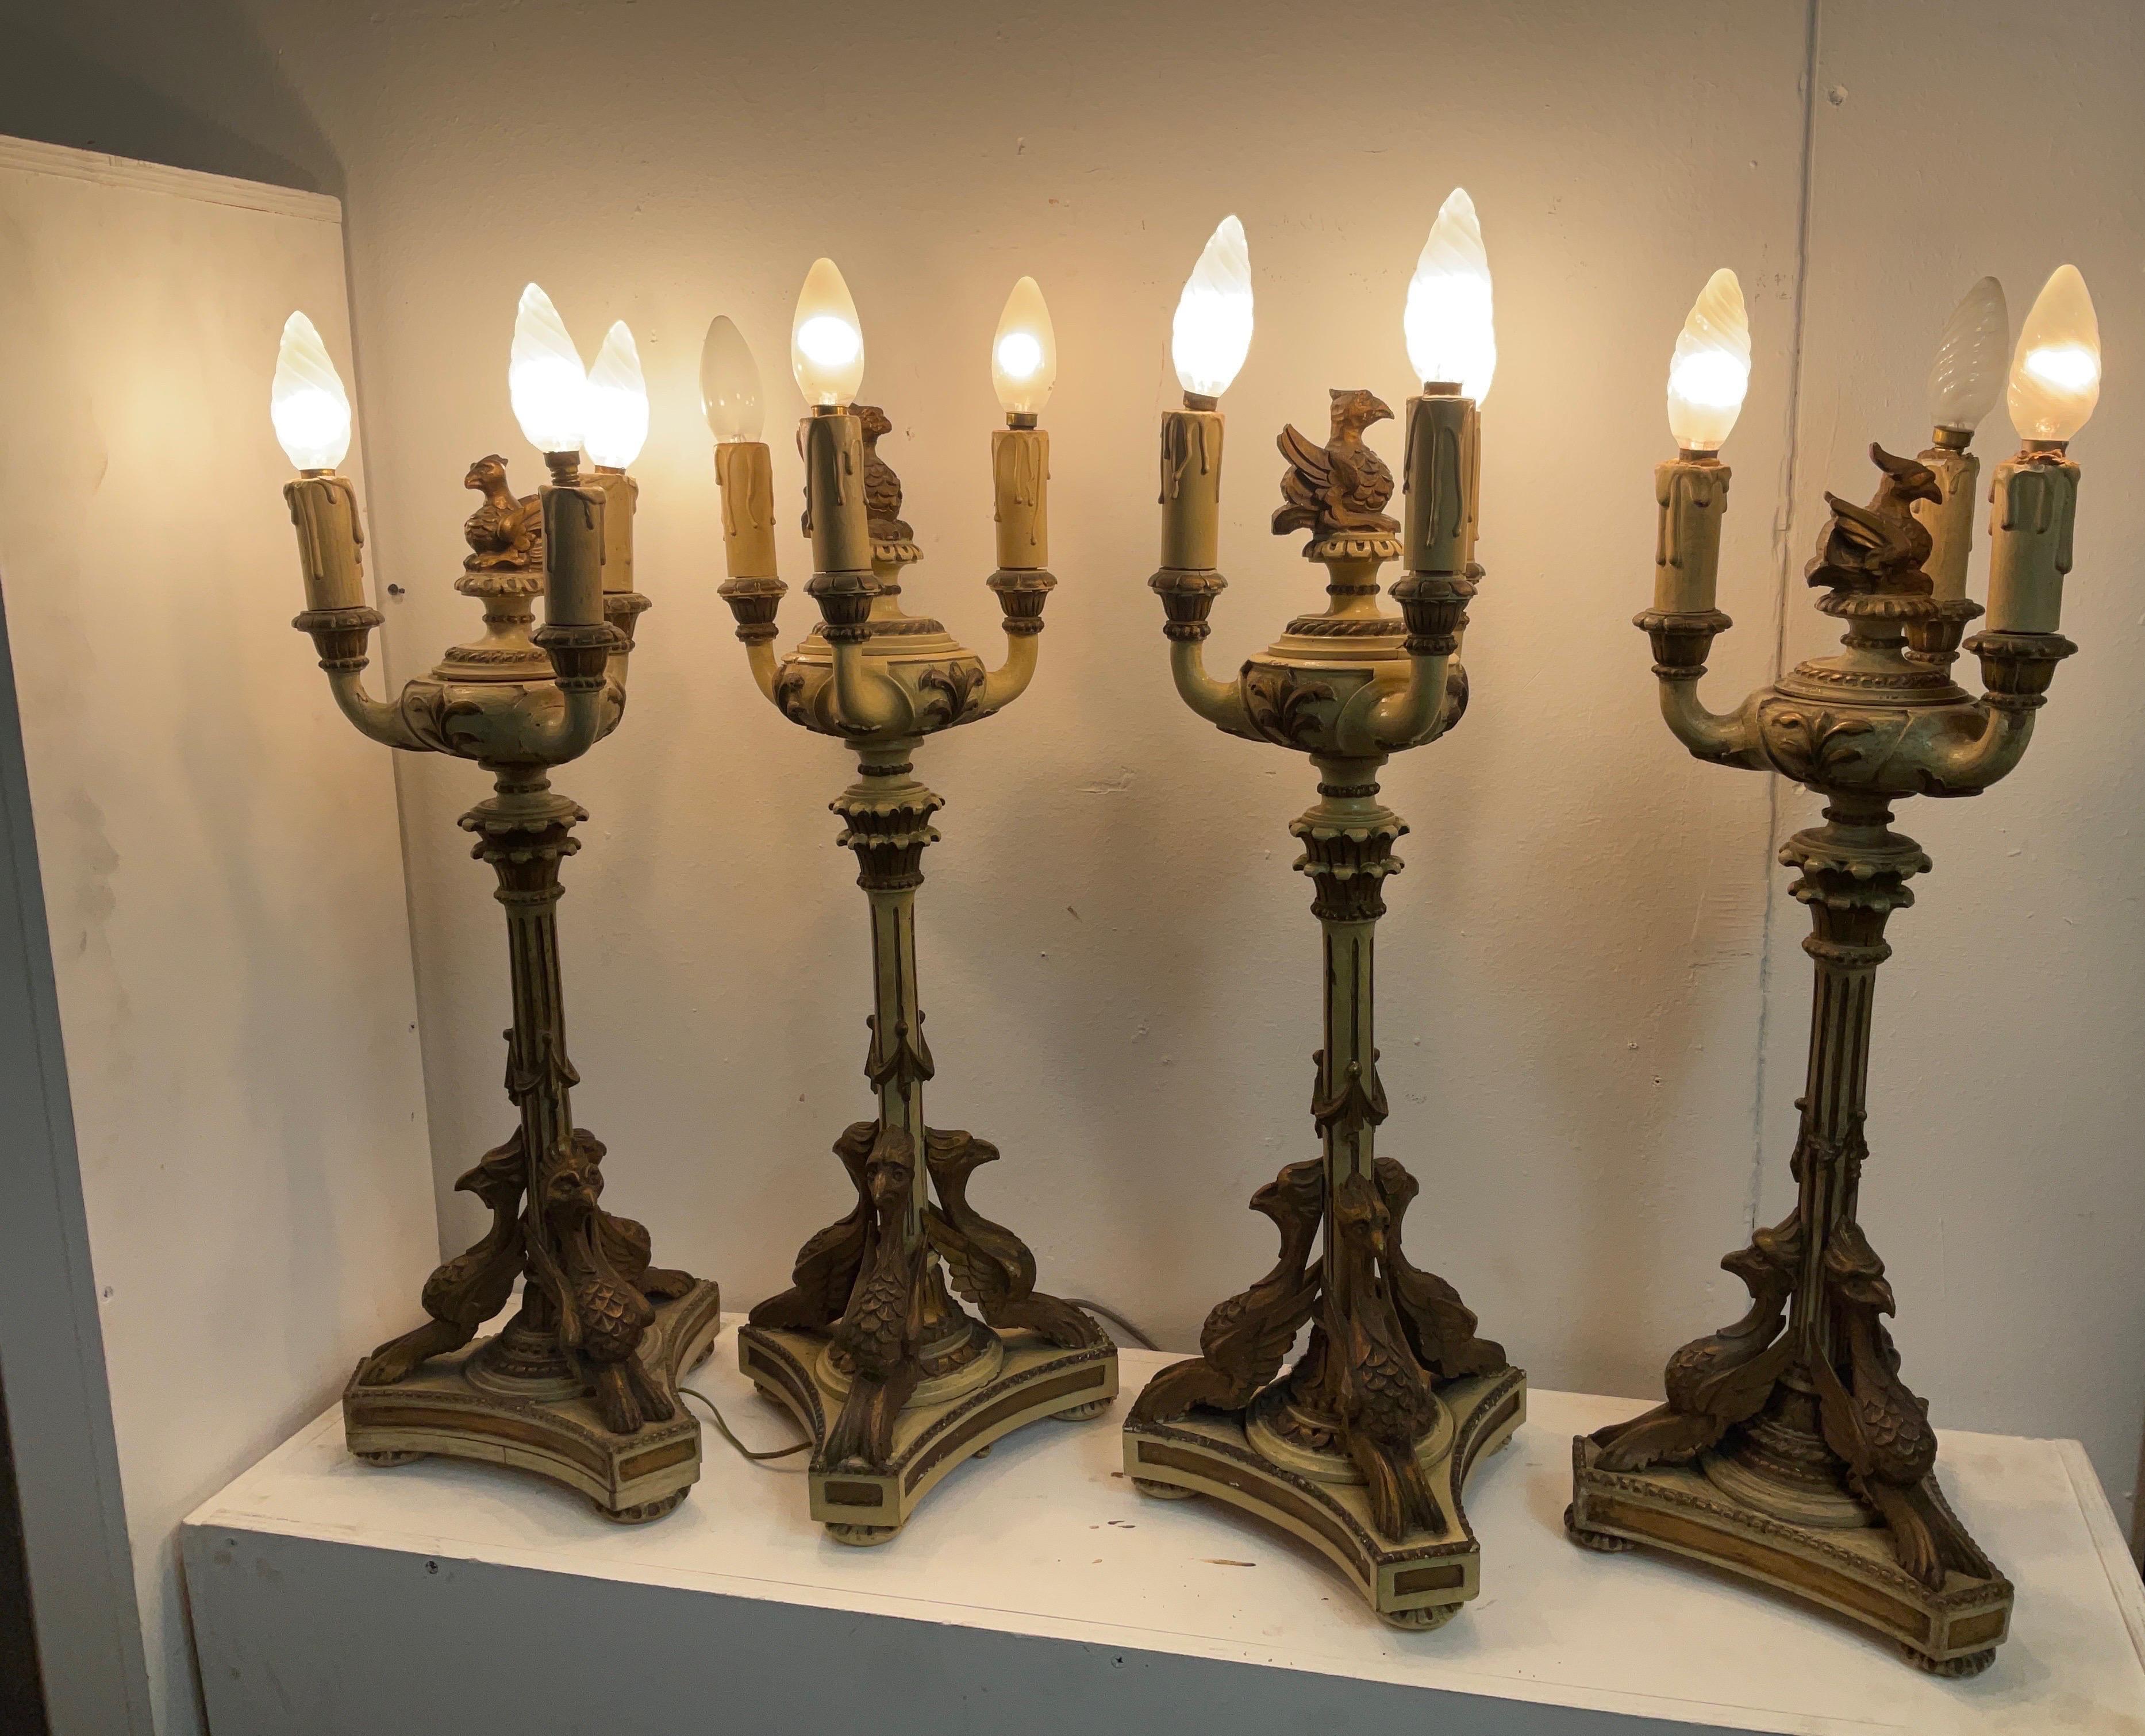 Lacquered and gilded wood candlesticks in empire style from the late 1800s in good condition with small wear and tear caused by years and use. Please review the attached images carefully. The empire style is one of the most appreciated to this day